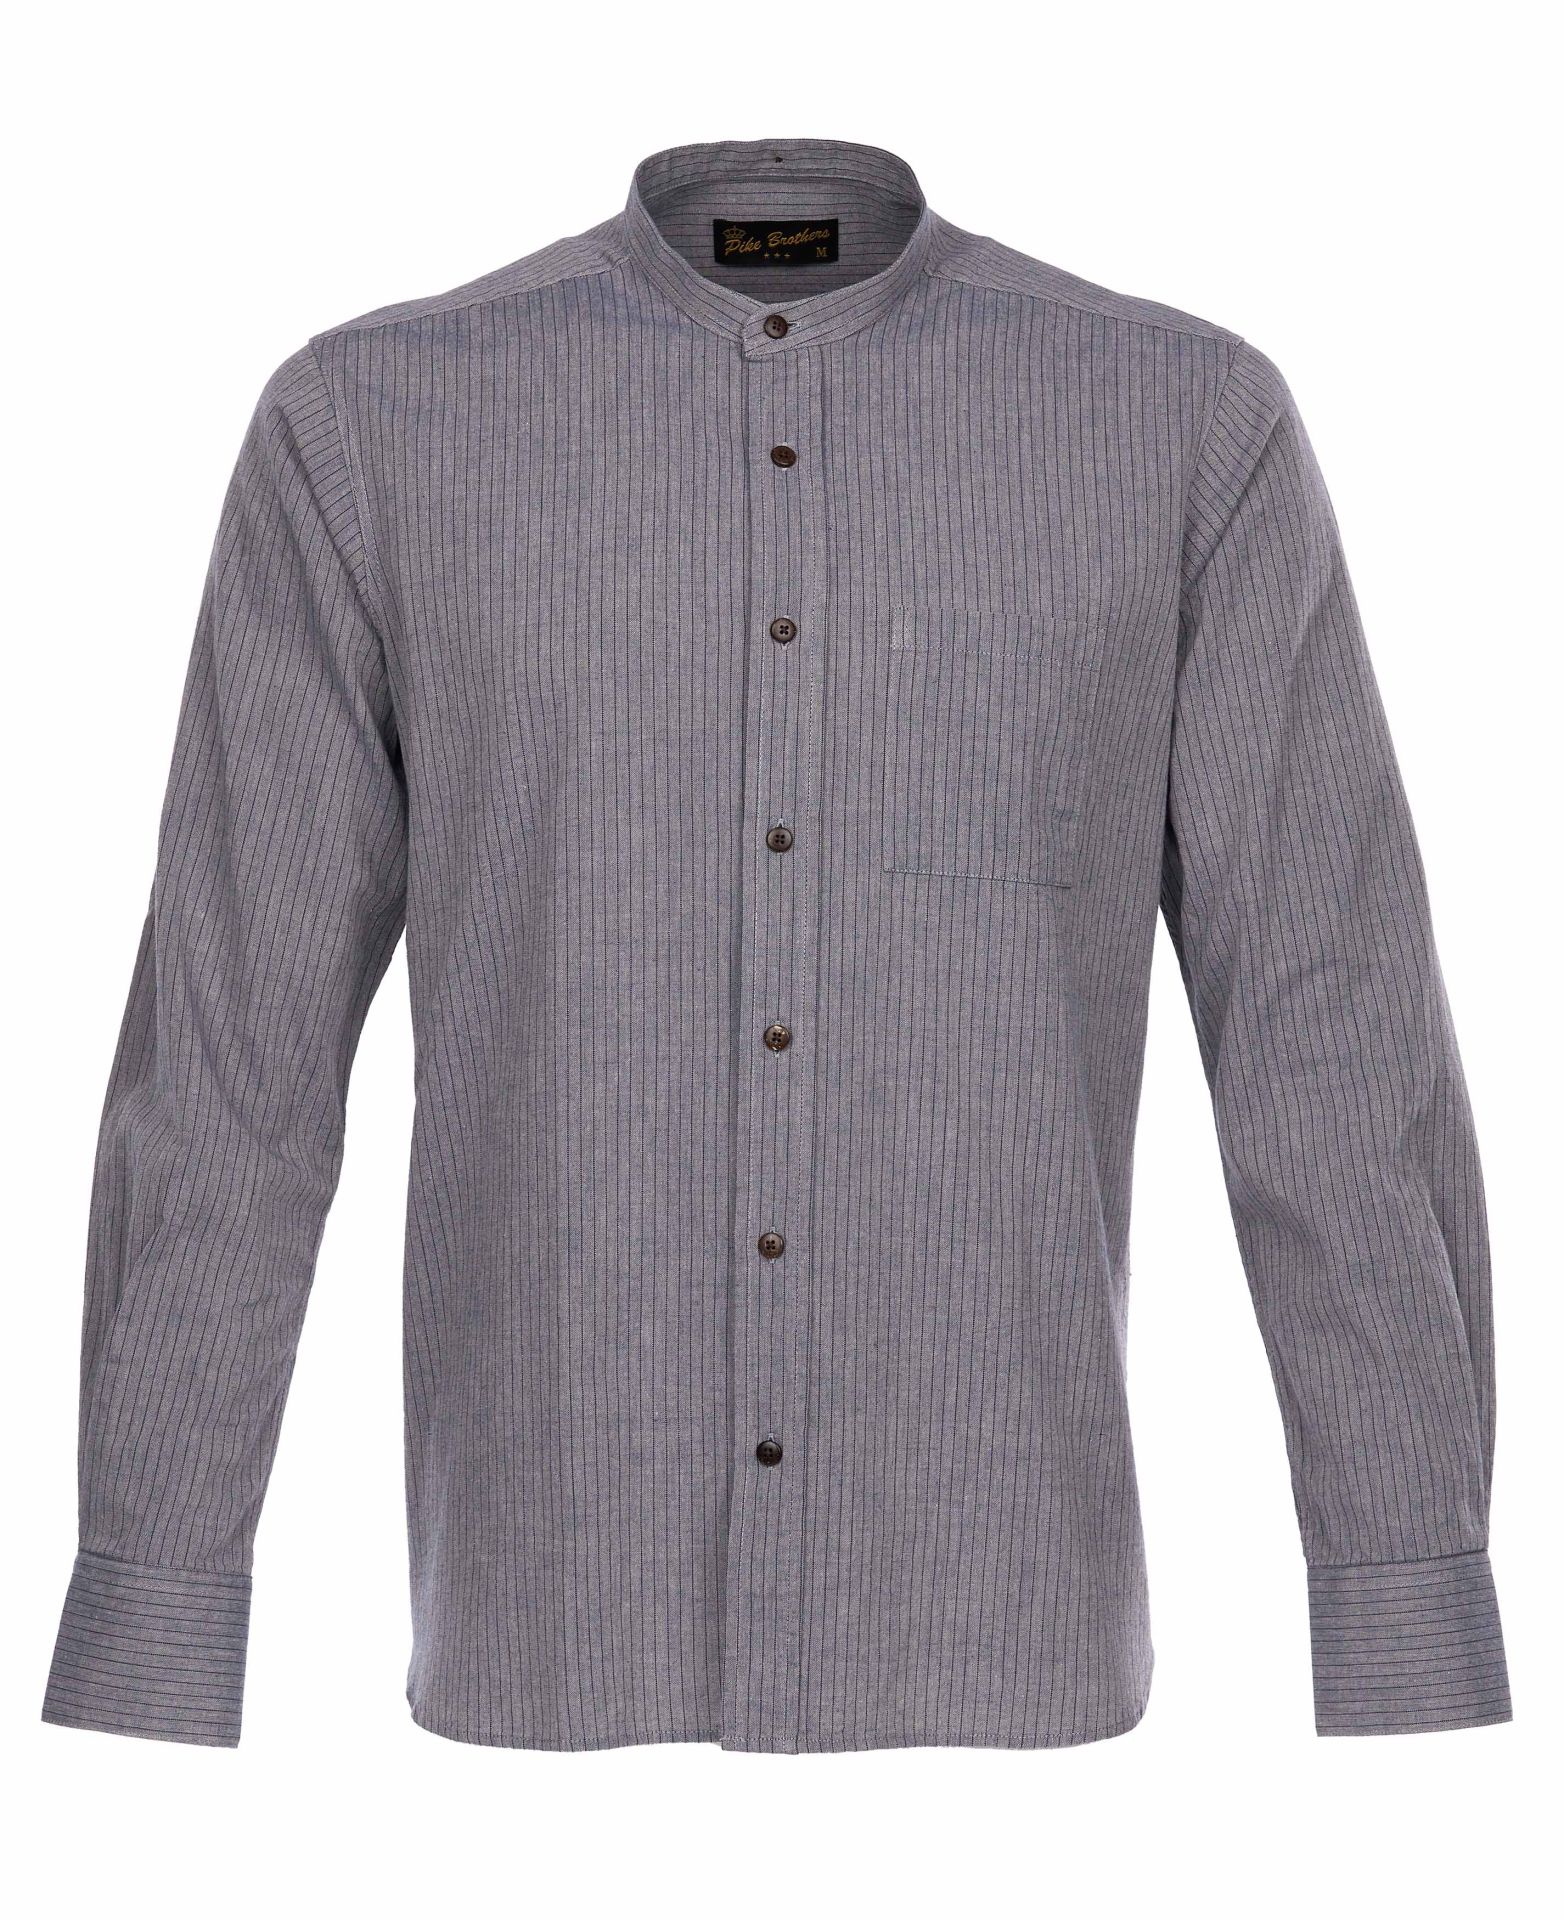 1923 Buccanoy Shirt grey striped (Pike Brothers)